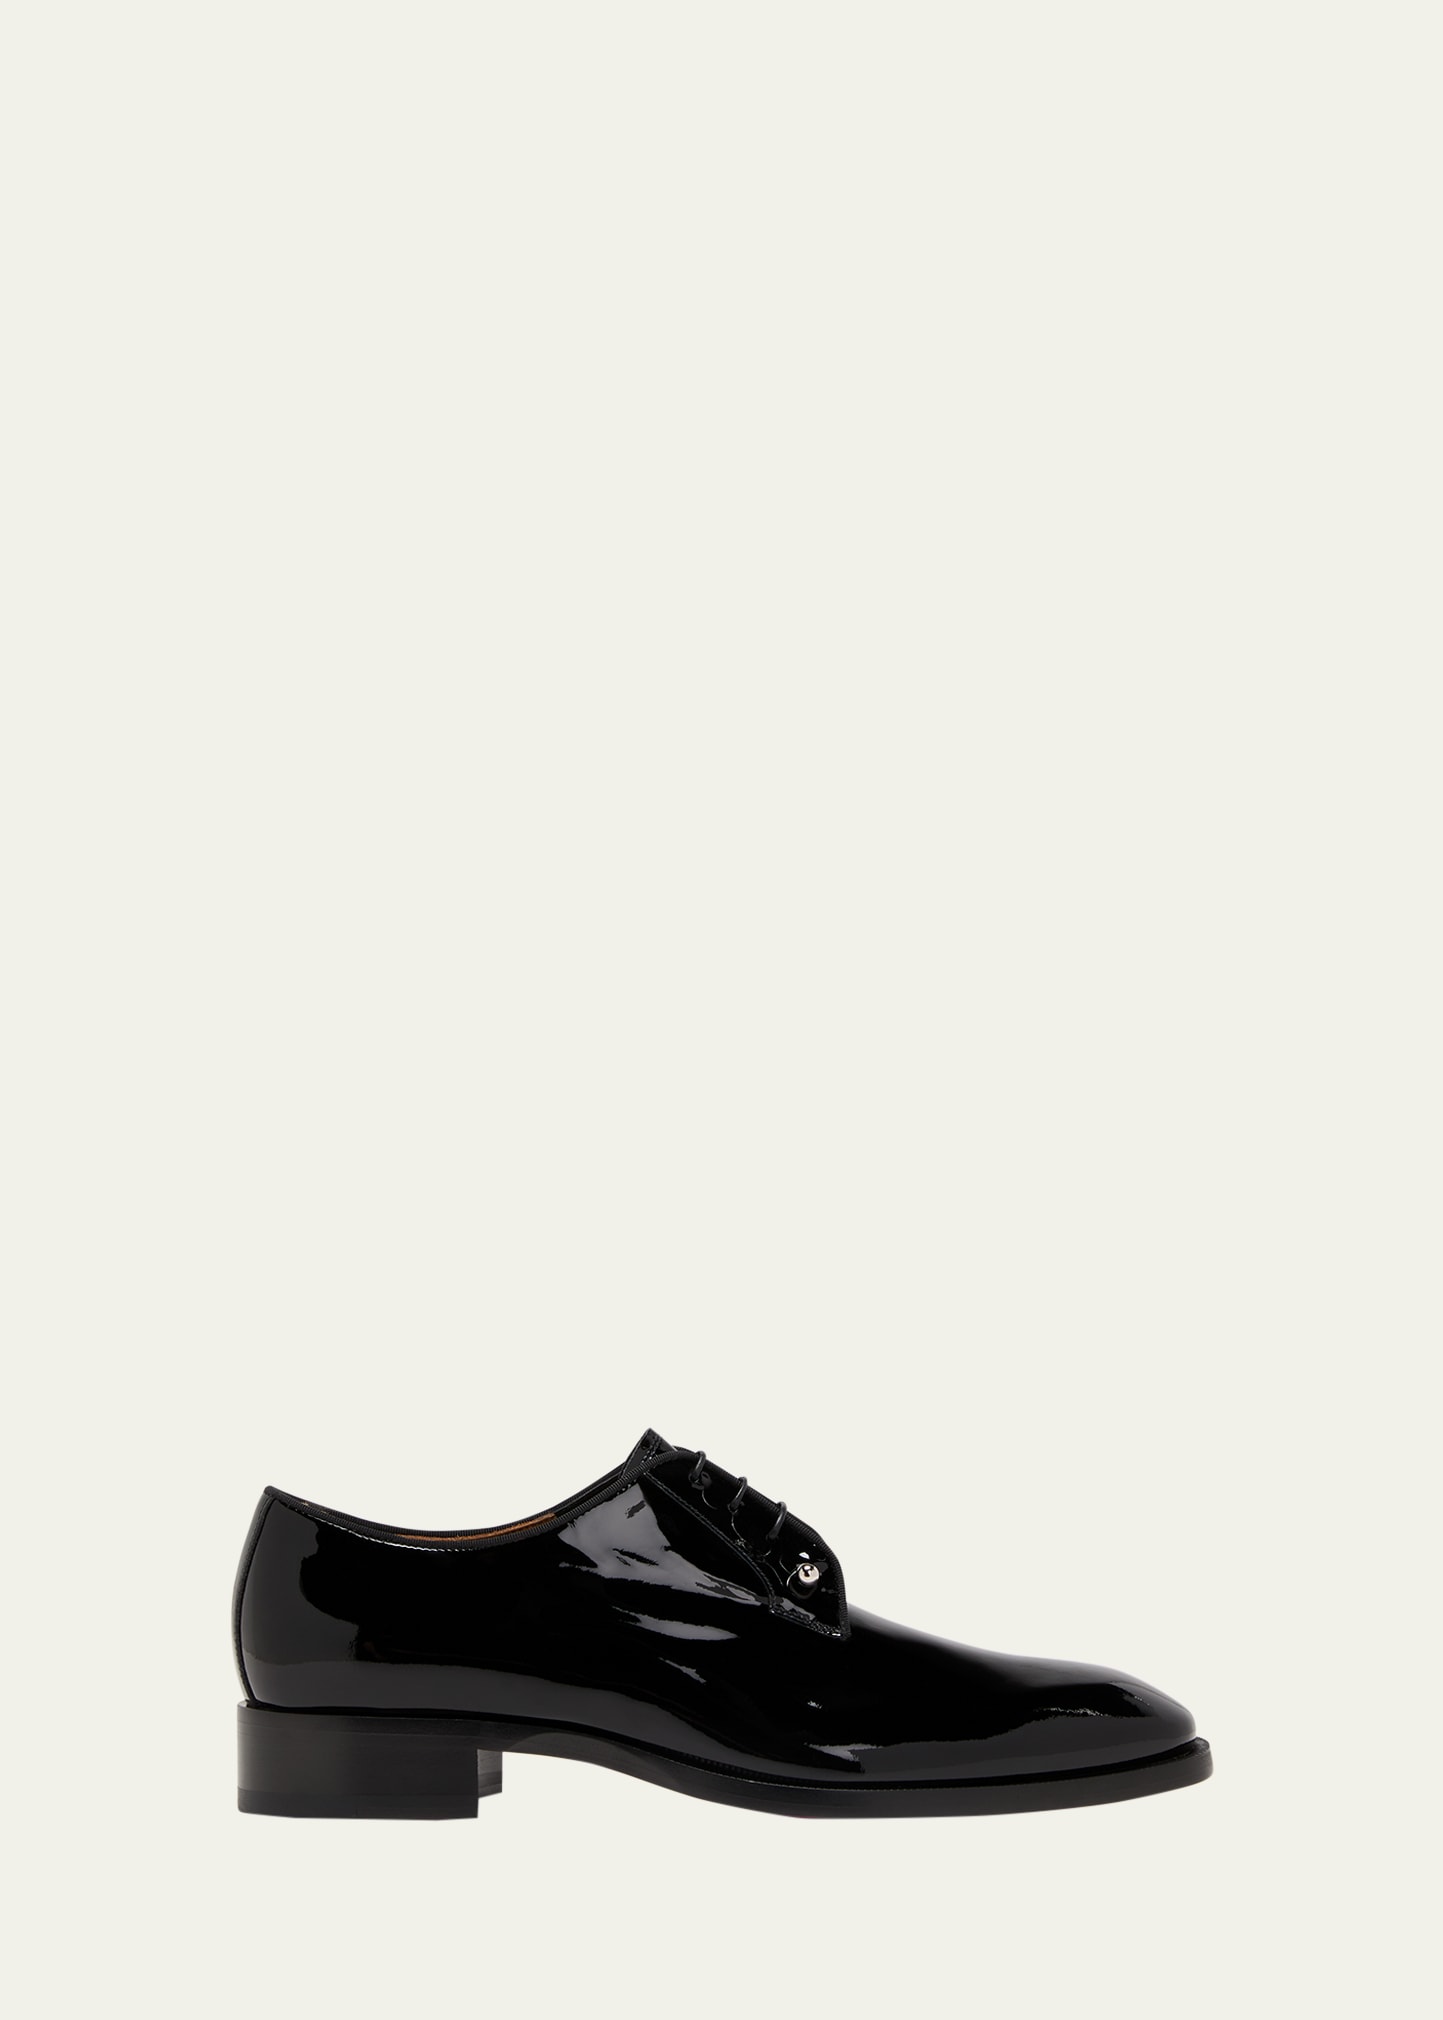 Men's Chambeliss Patent Leather Derby Shoes